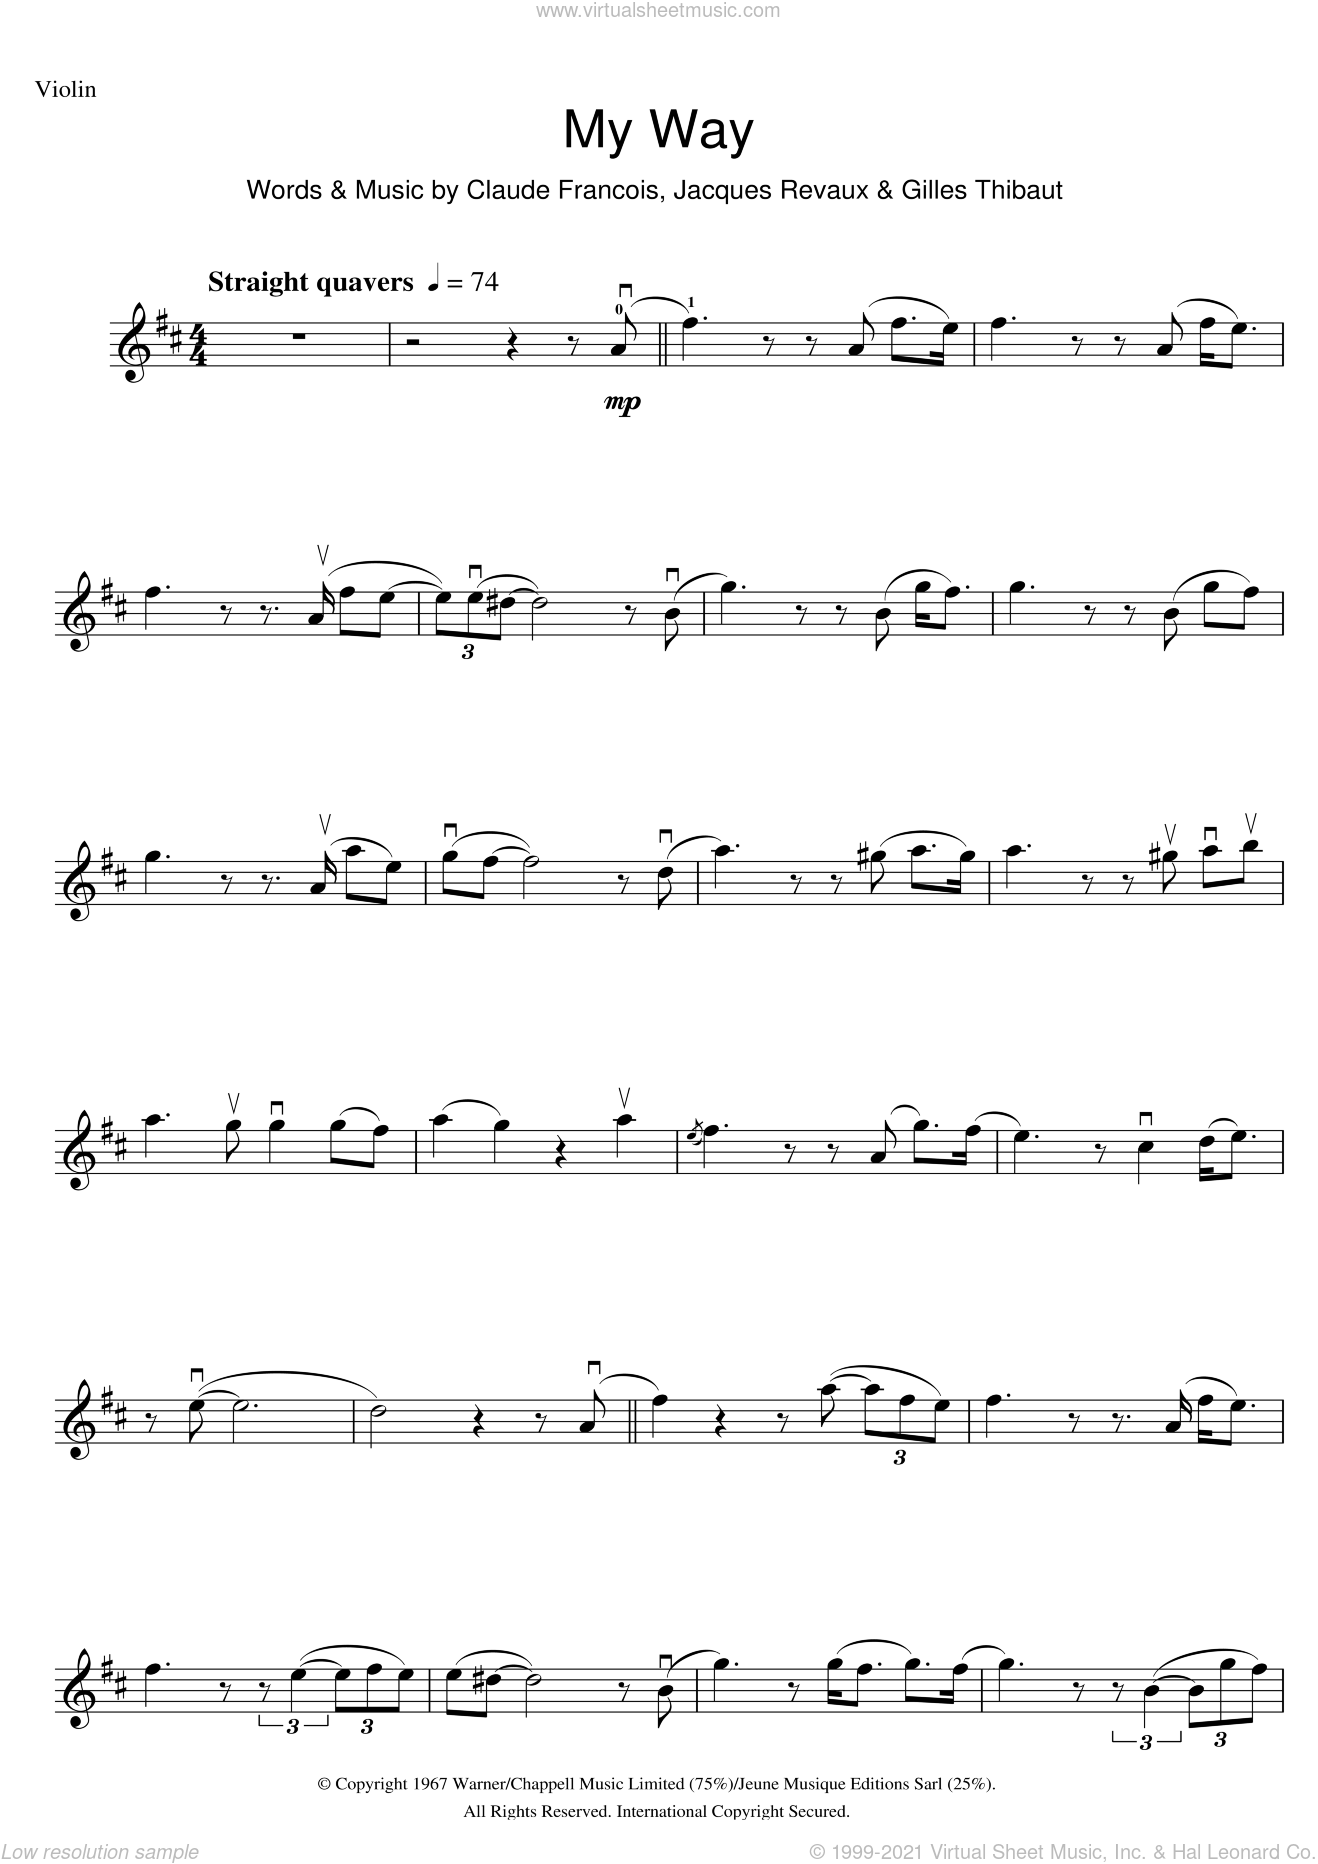 Where Can I Get Free Sheet Music For Violin